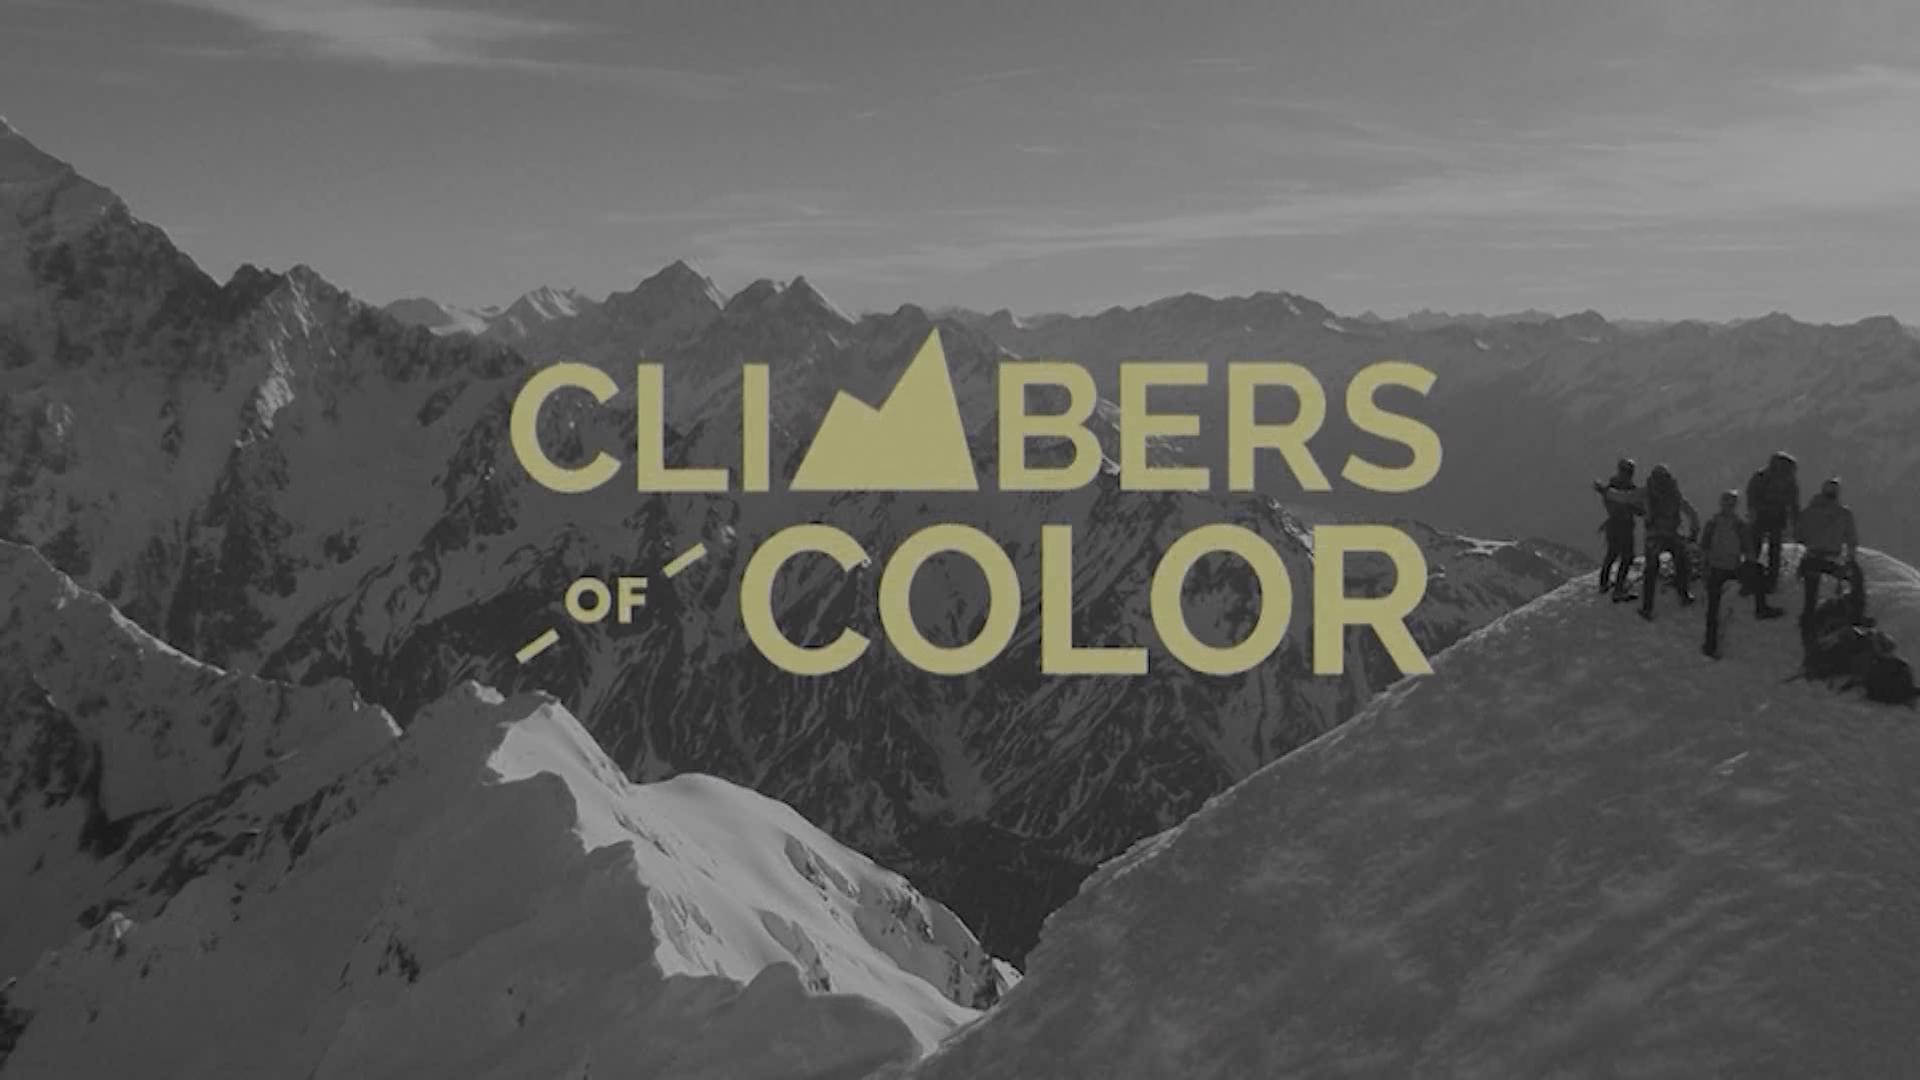 Climbers of Color is bringing diversity to the mountains. #k5evening